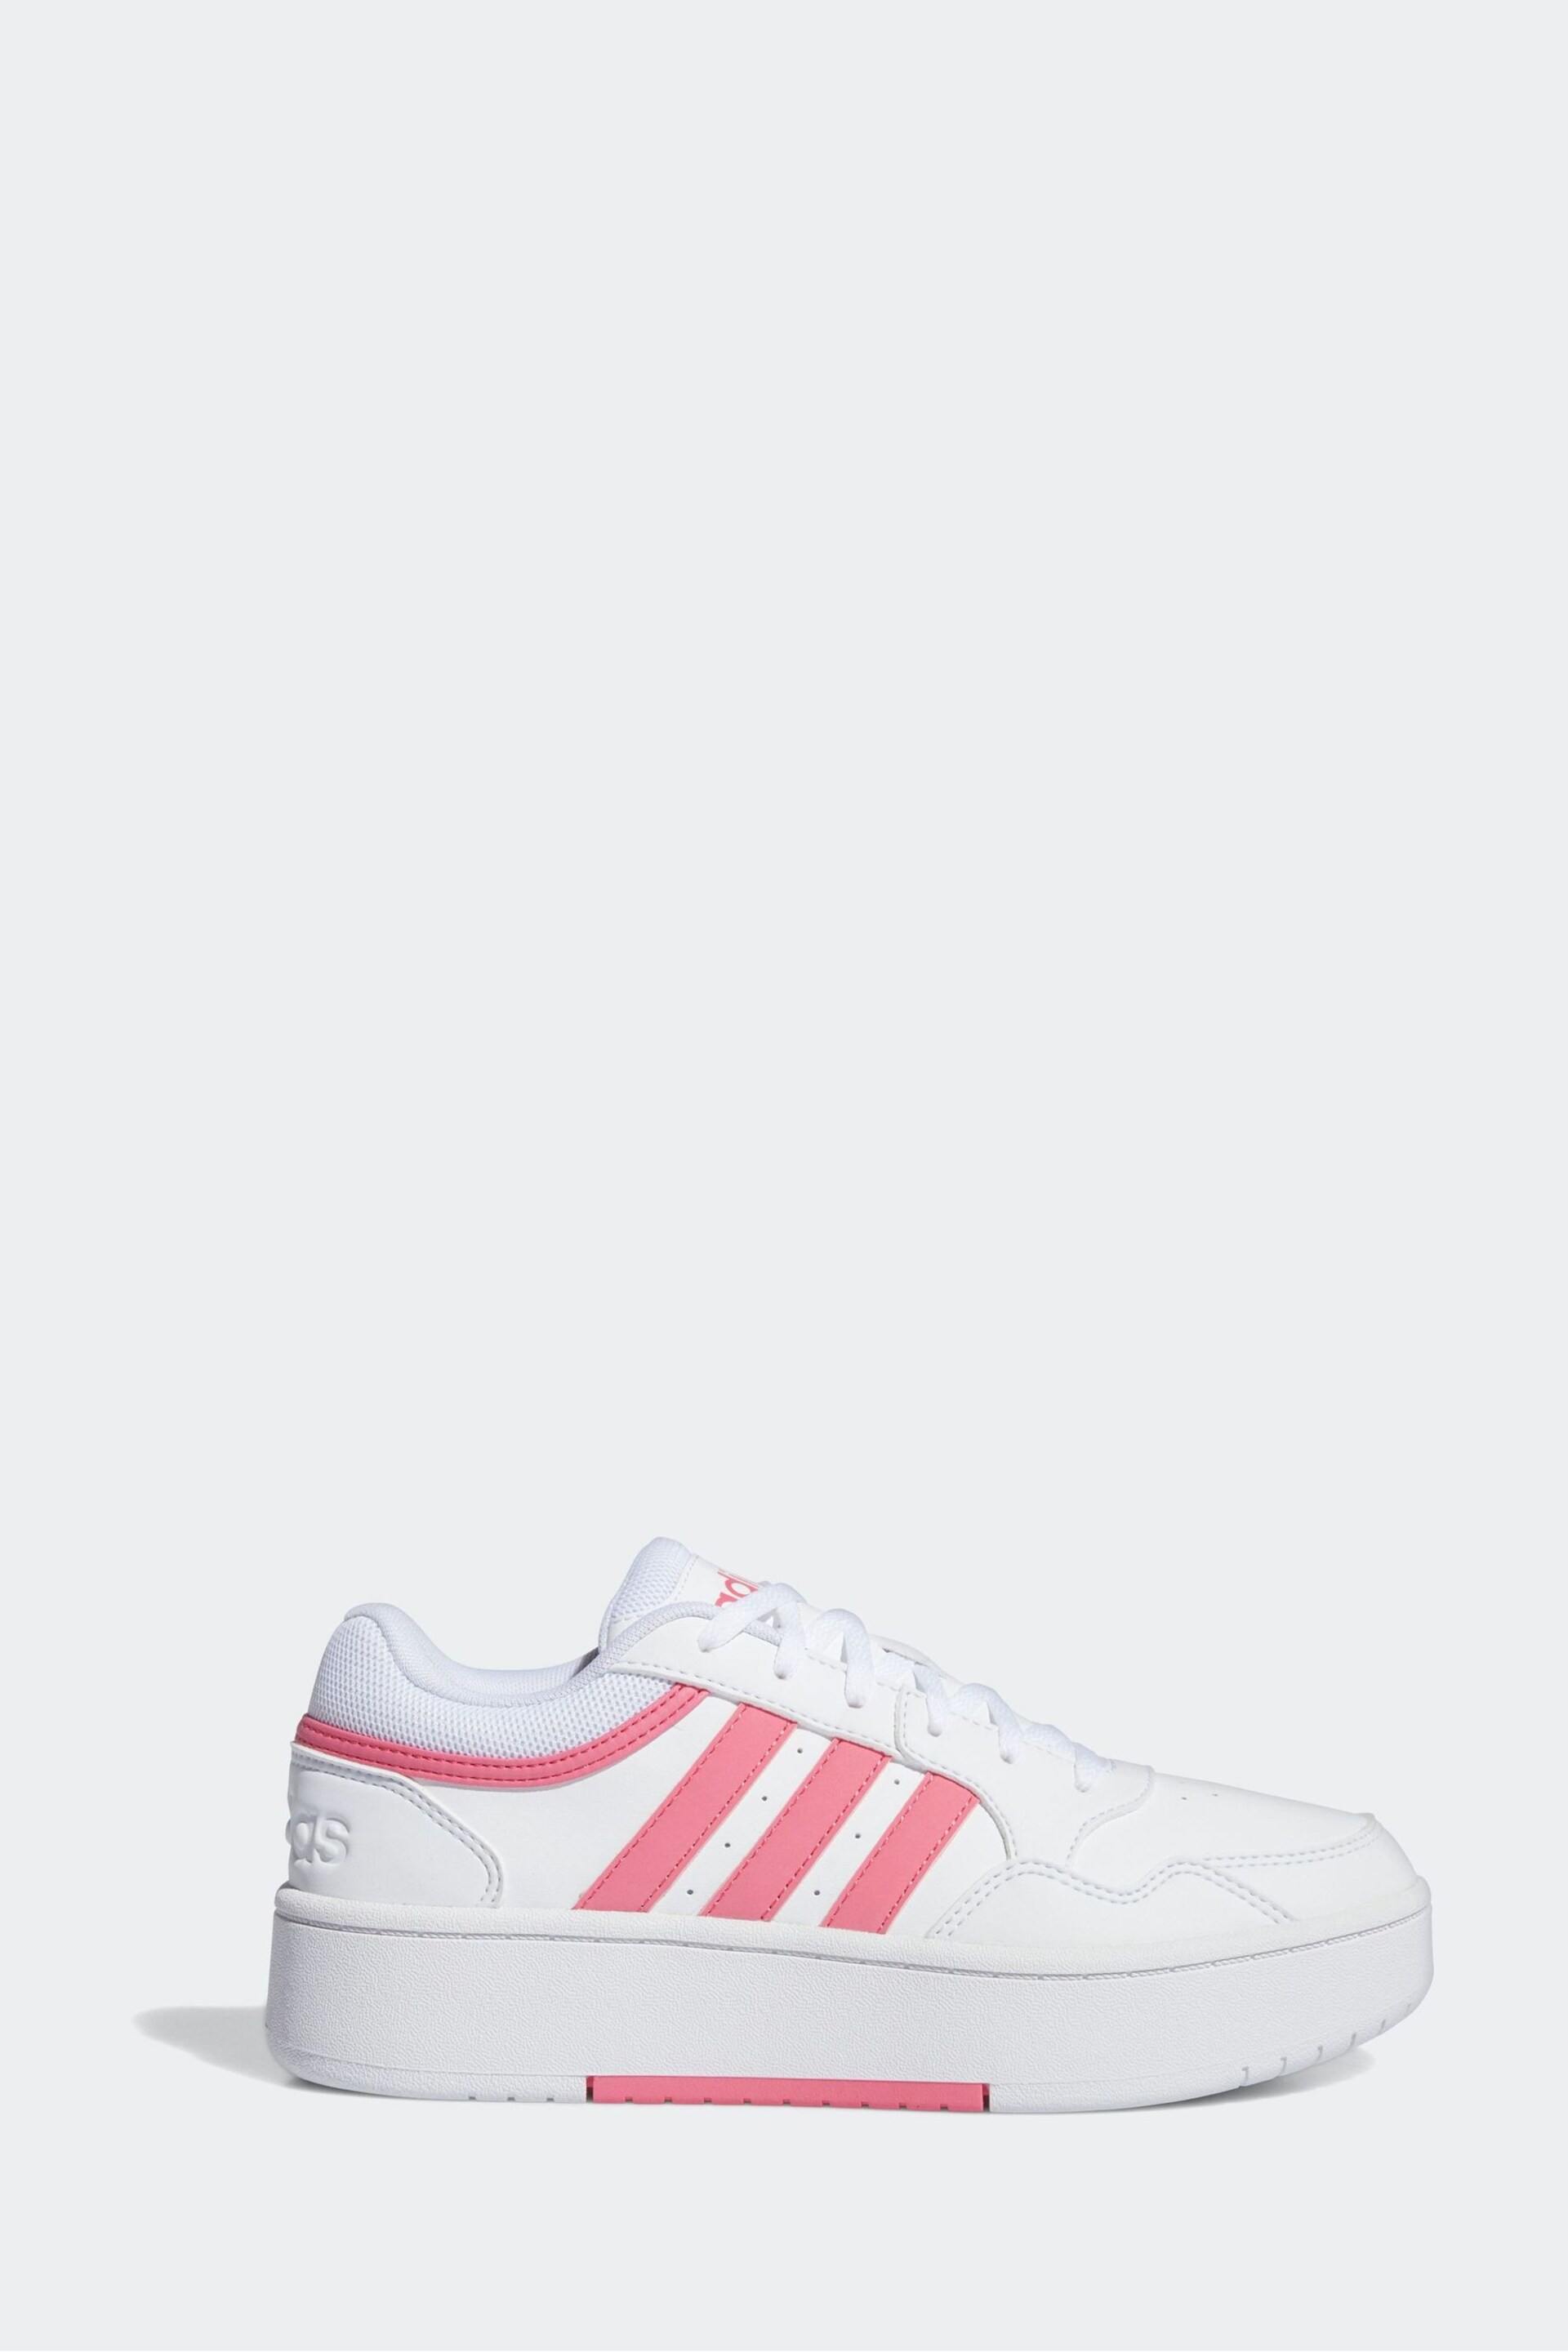 adidas Originals White/Pink Hoops 3.0 Bold Trainers - Image 8 of 9